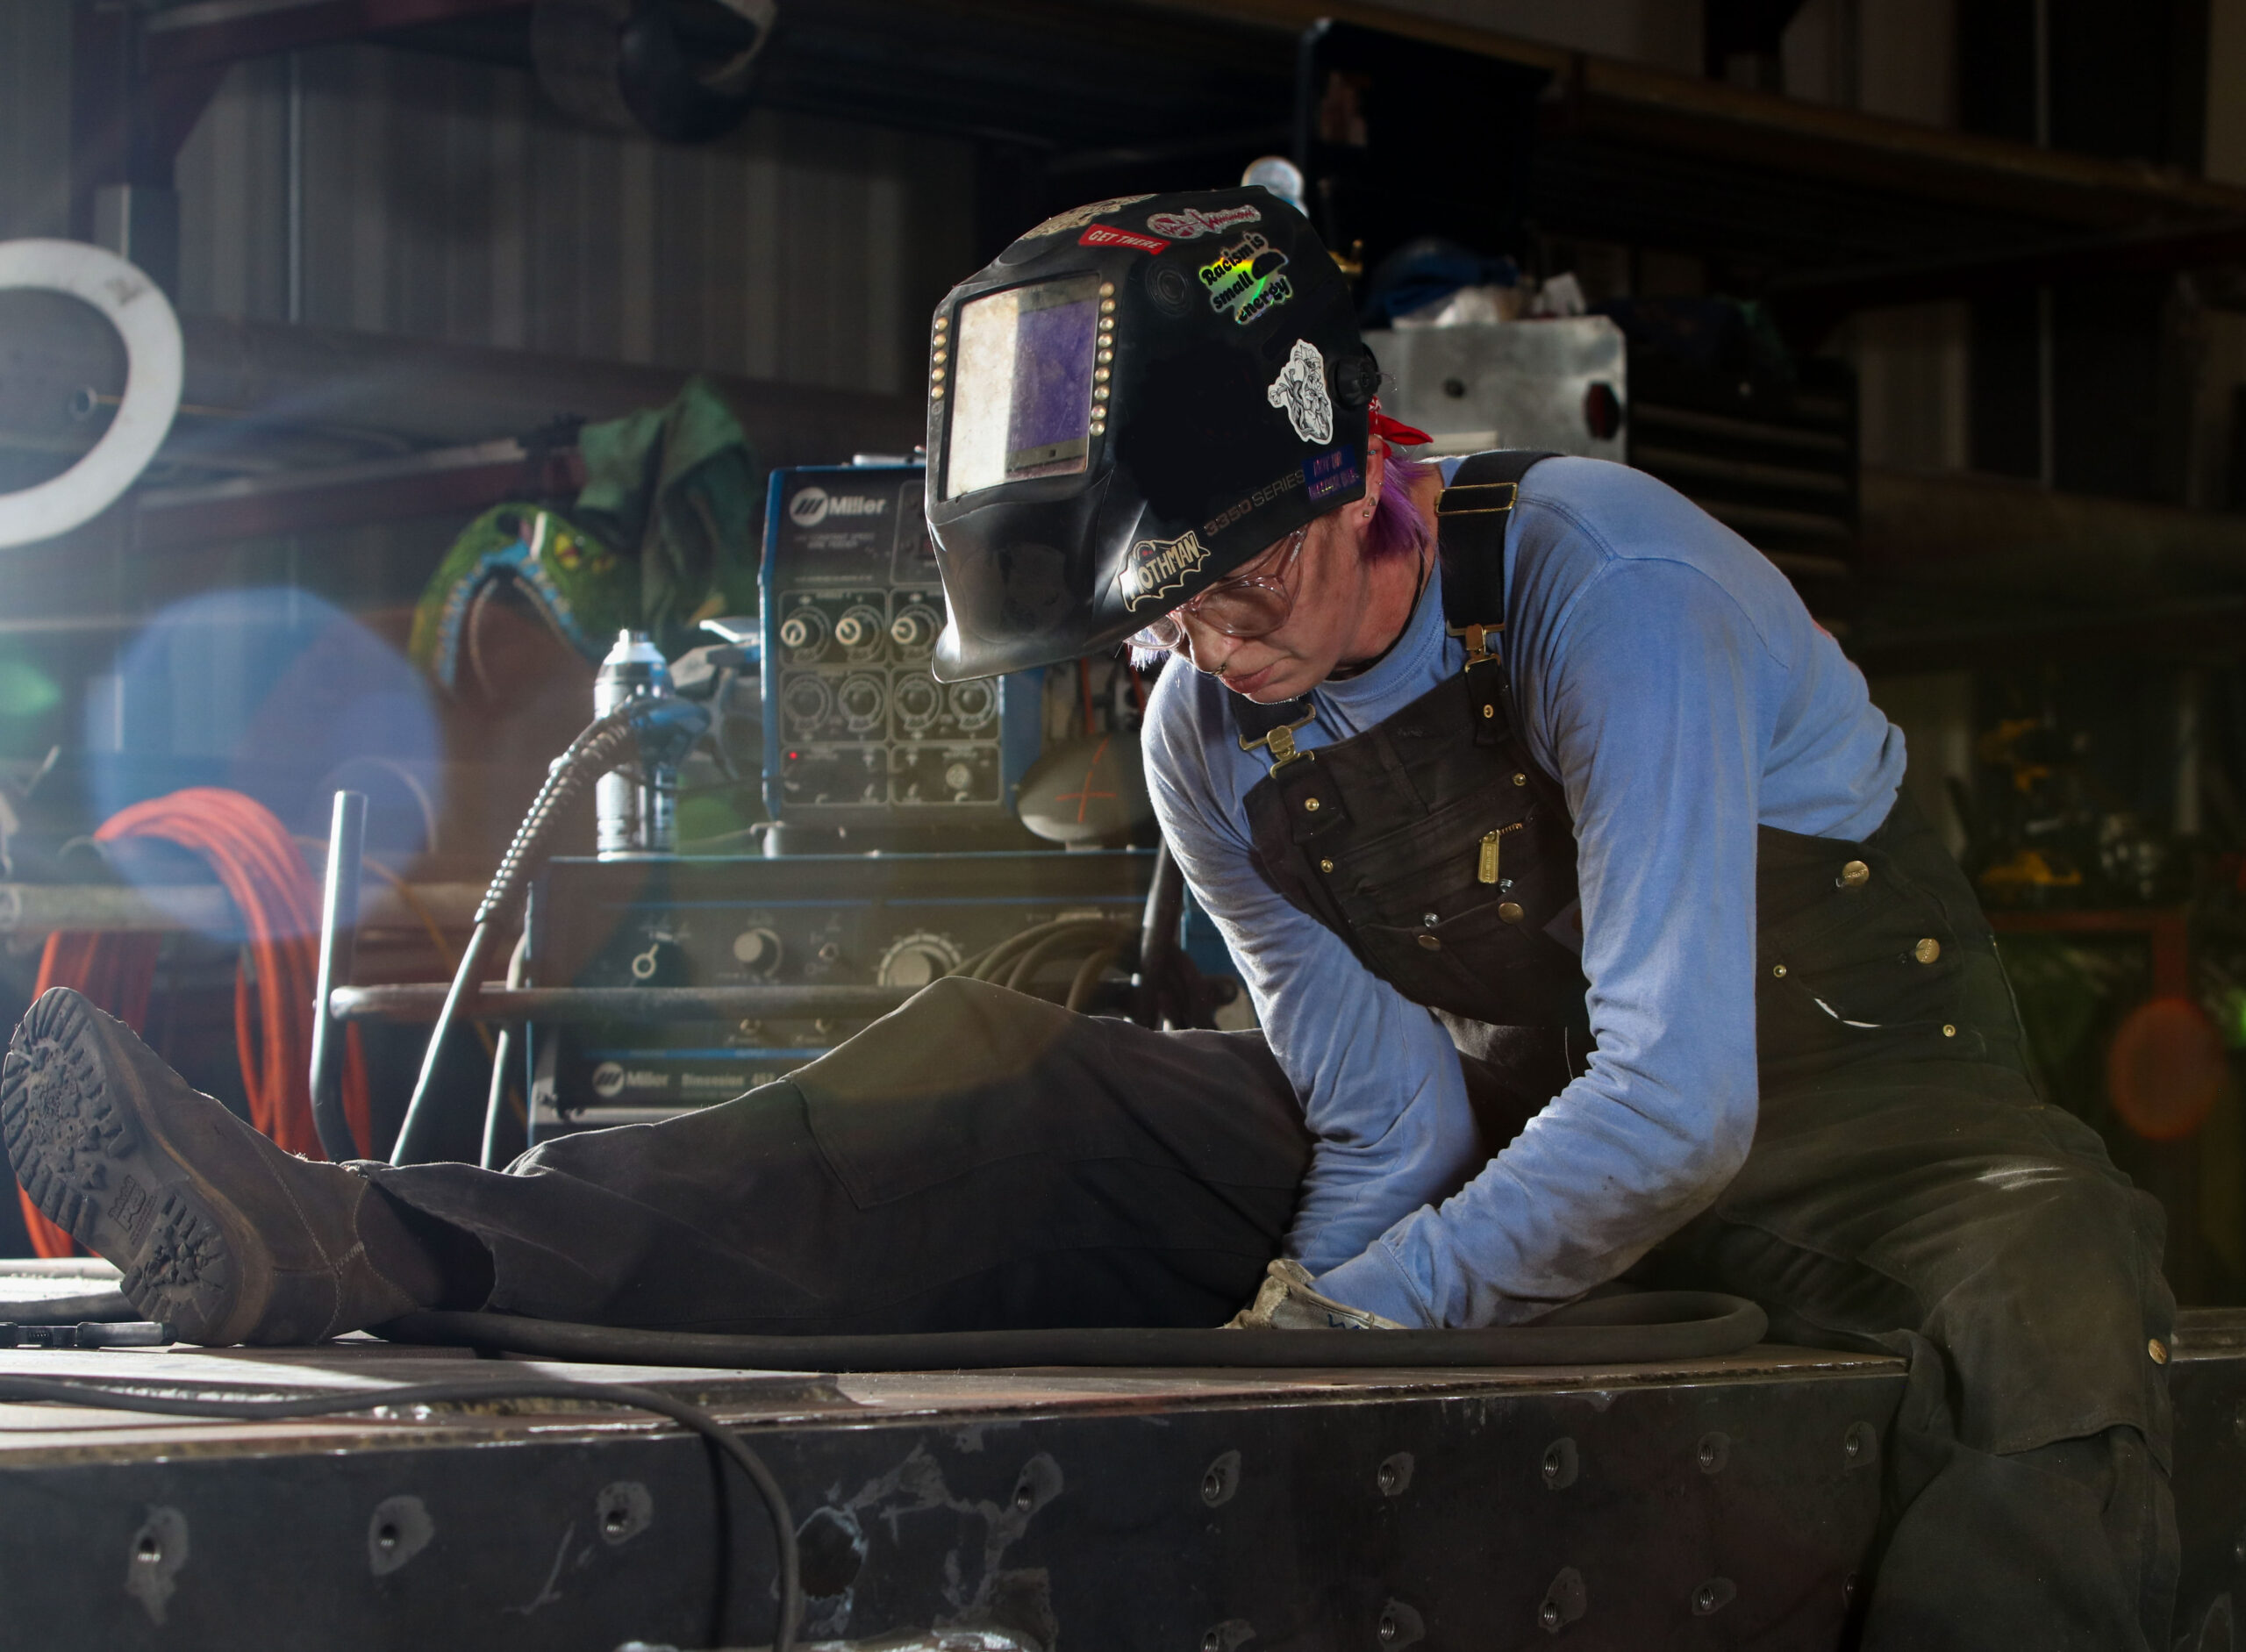 Melissa wearing a welding hood, long sleeve blue shirt, and dark overalls. She is mimicking welding for the photo.